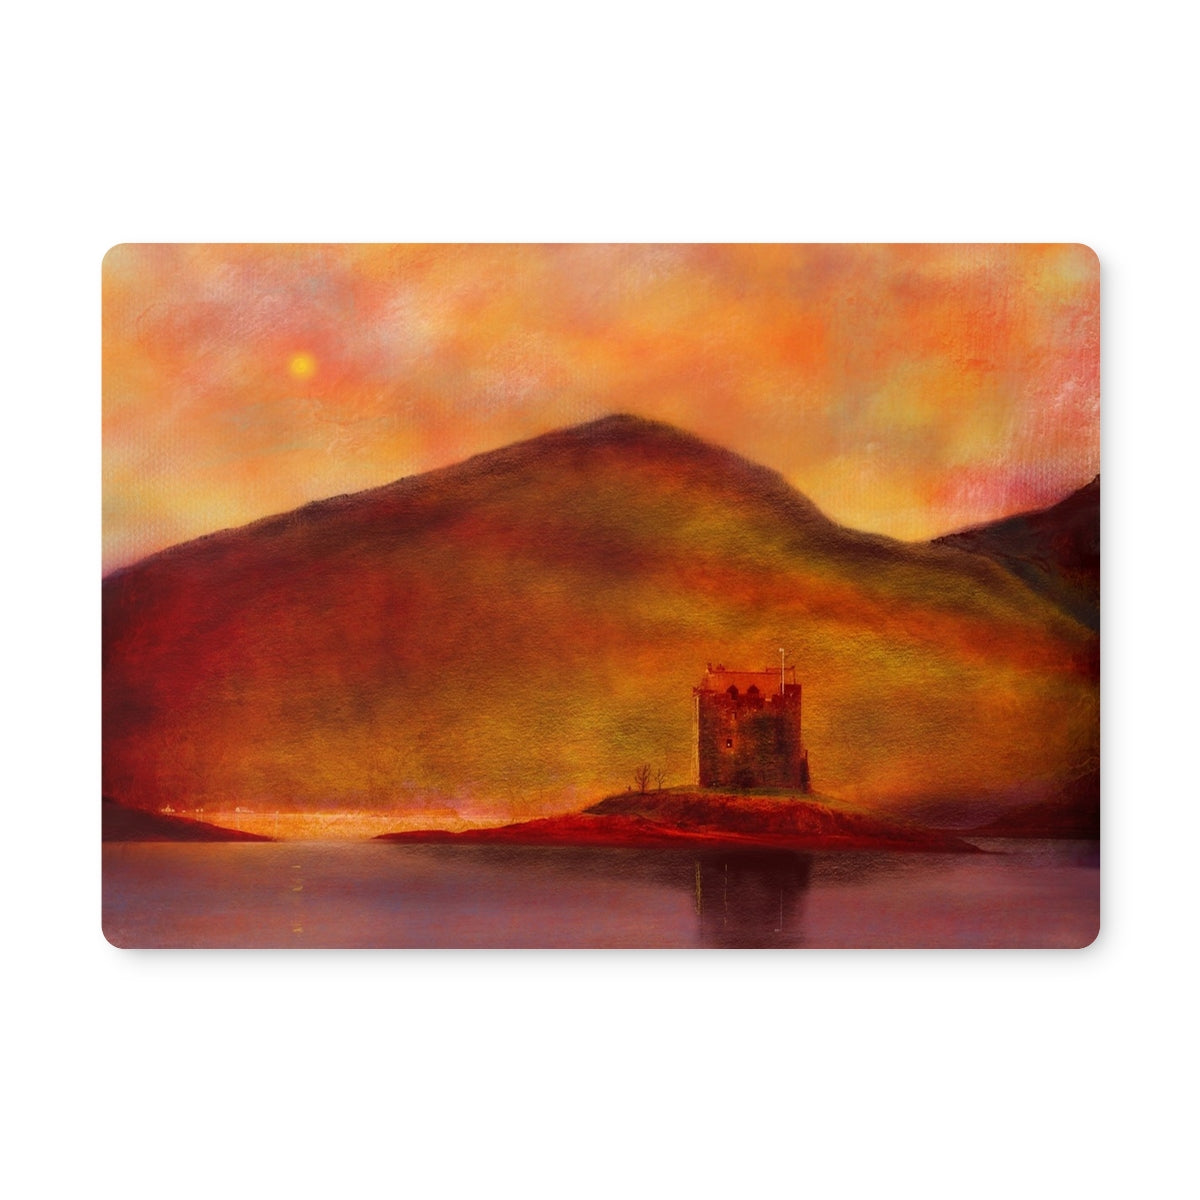 Castle Stalker Sunset Art Gifts Placemat-Placemats-Historic & Iconic Scotland Art Gallery-Single Placemat-Paintings, Prints, Homeware, Art Gifts From Scotland By Scottish Artist Kevin Hunter